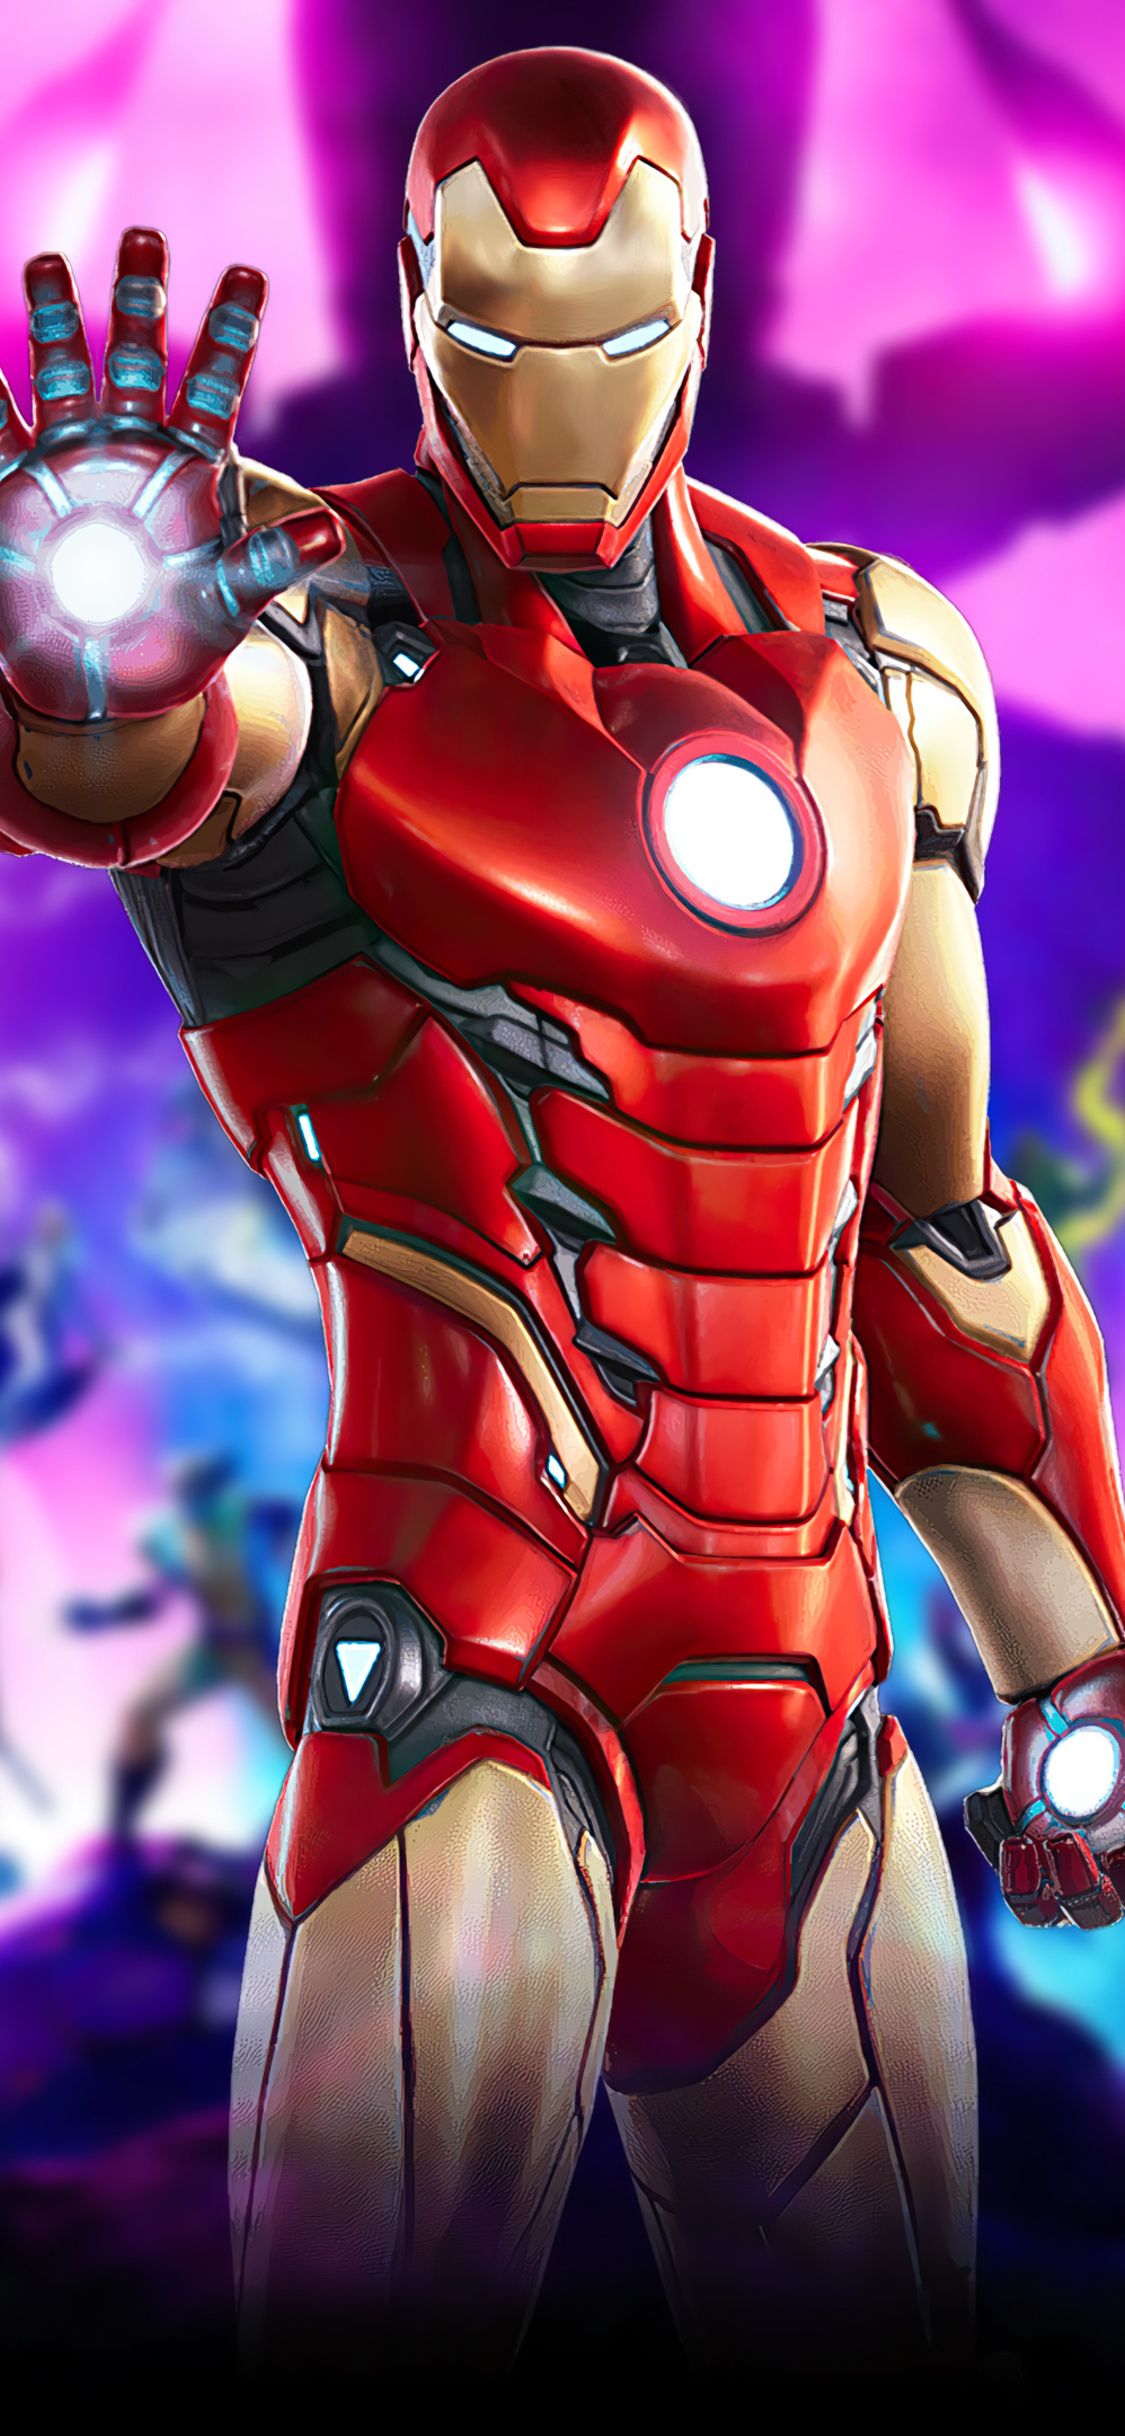 Fortnite Marvel Iron Man iPhone XS, iPhone iPhone X HD 4k Wallpaper, Image, Background, Photo and Picture